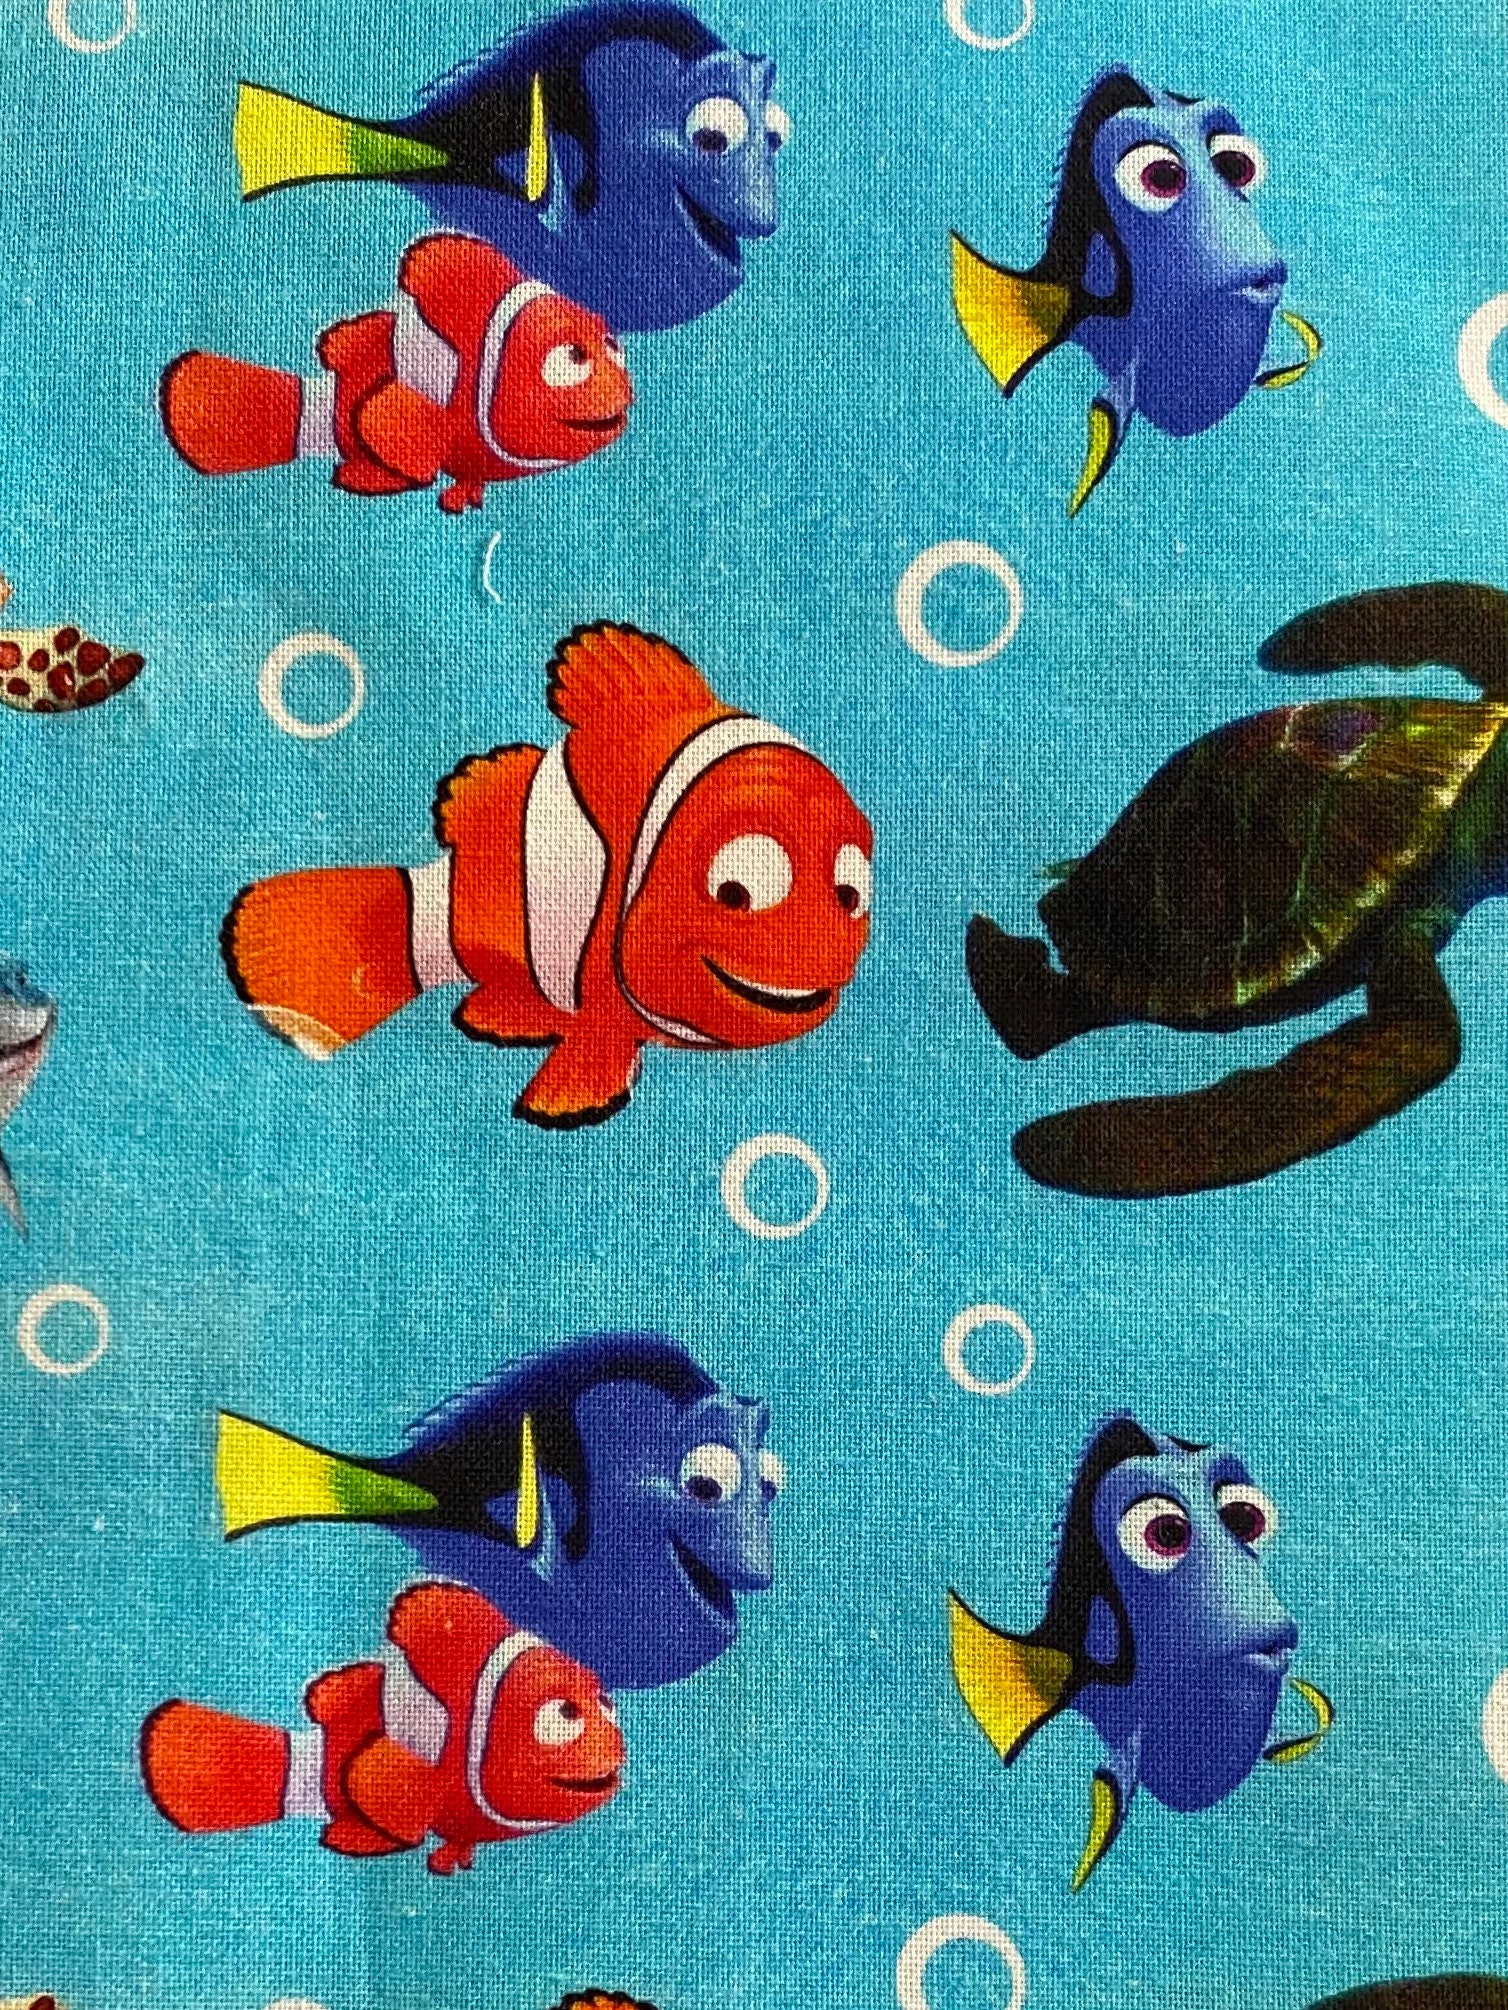 Finding Nemo Iron on Patch, Fish Patches, Cow Patches Iron on